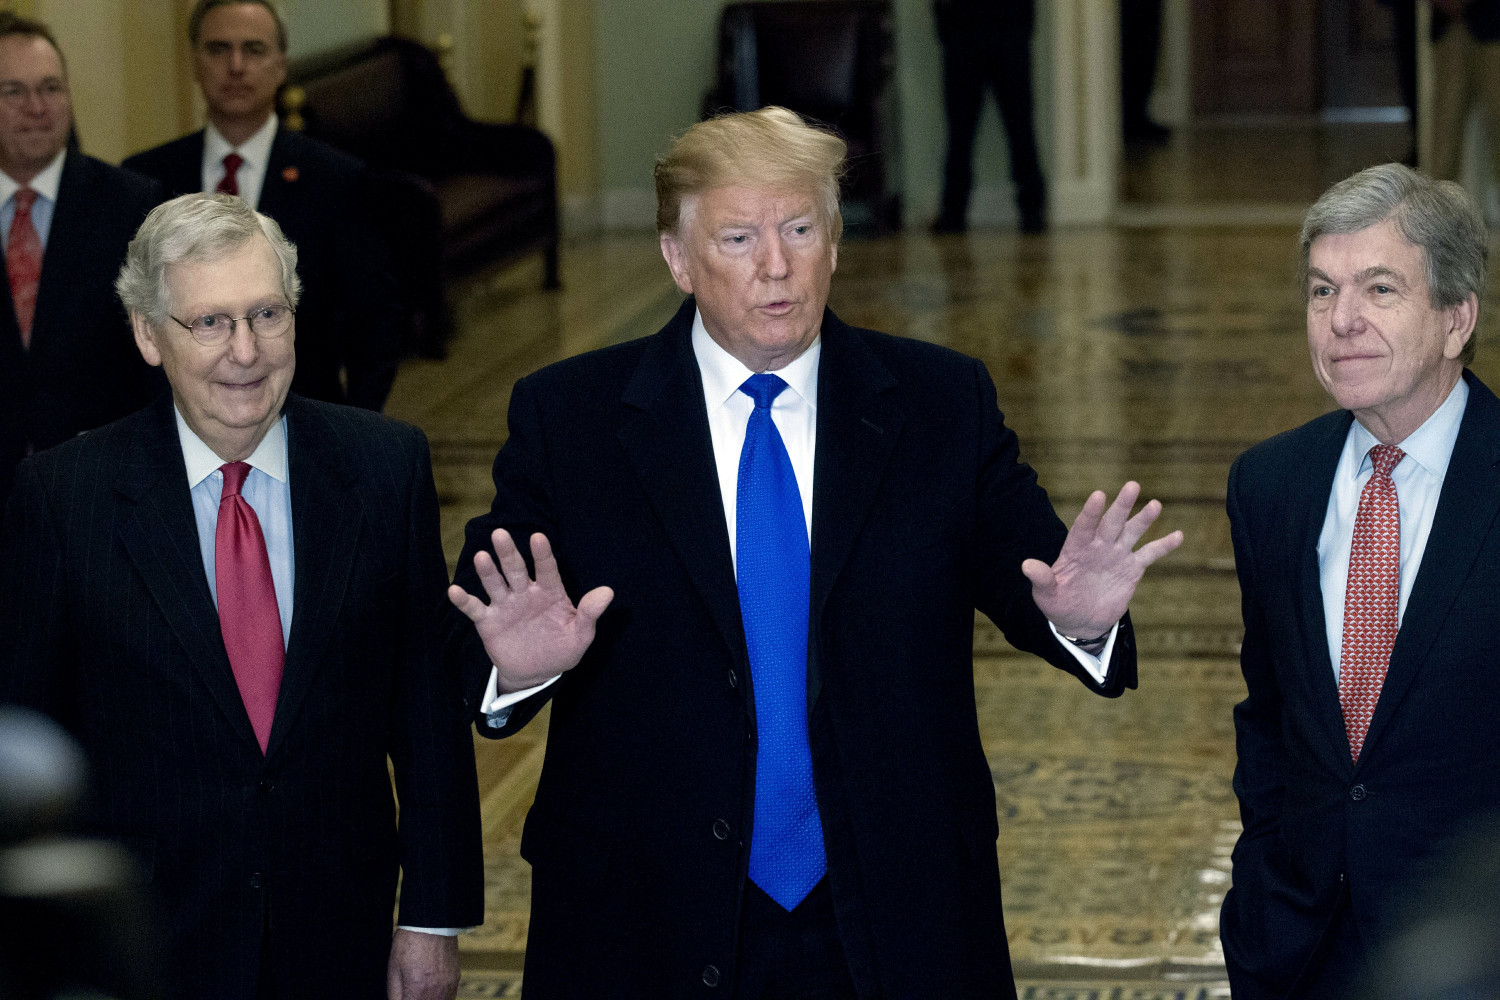 Senate GOP Fails to End Democratic Delays on Trump Nominees; Nuclear Option Next for McConnell?